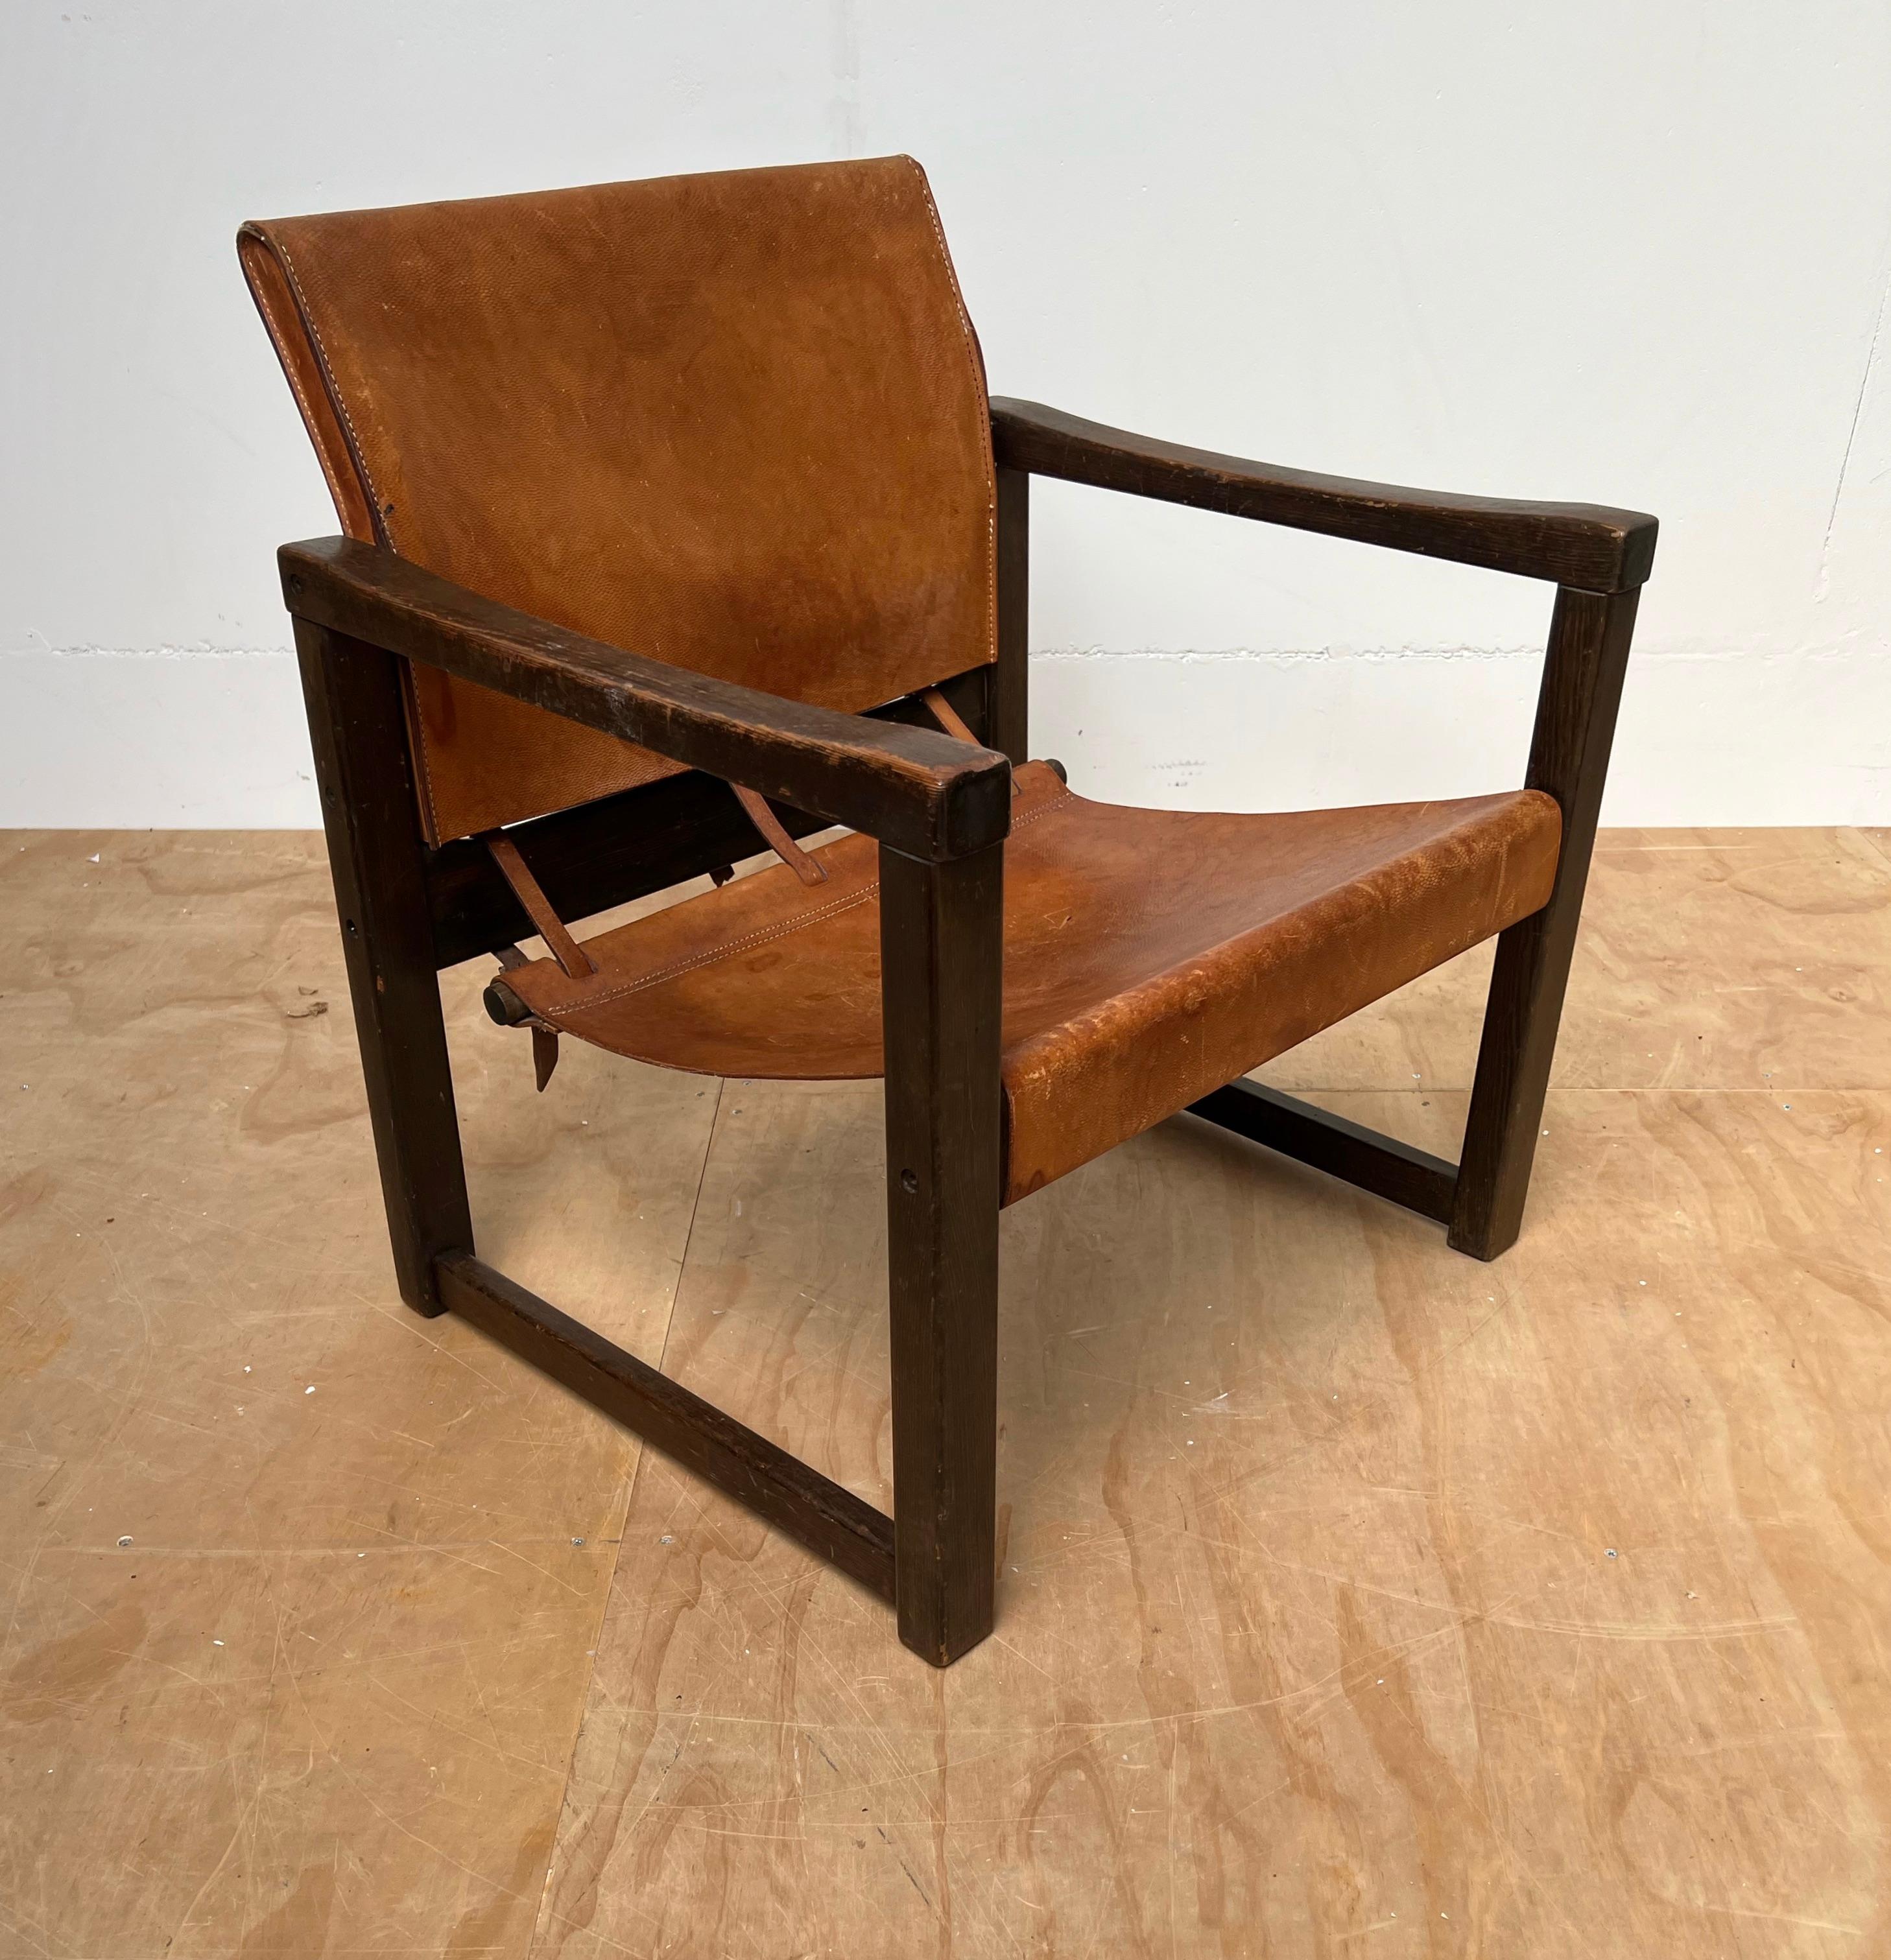 Beautiful design and amazing original condition chair.

The design and the look and feel of this rare chair reminded me of what someone once taught me about good sculptures, 